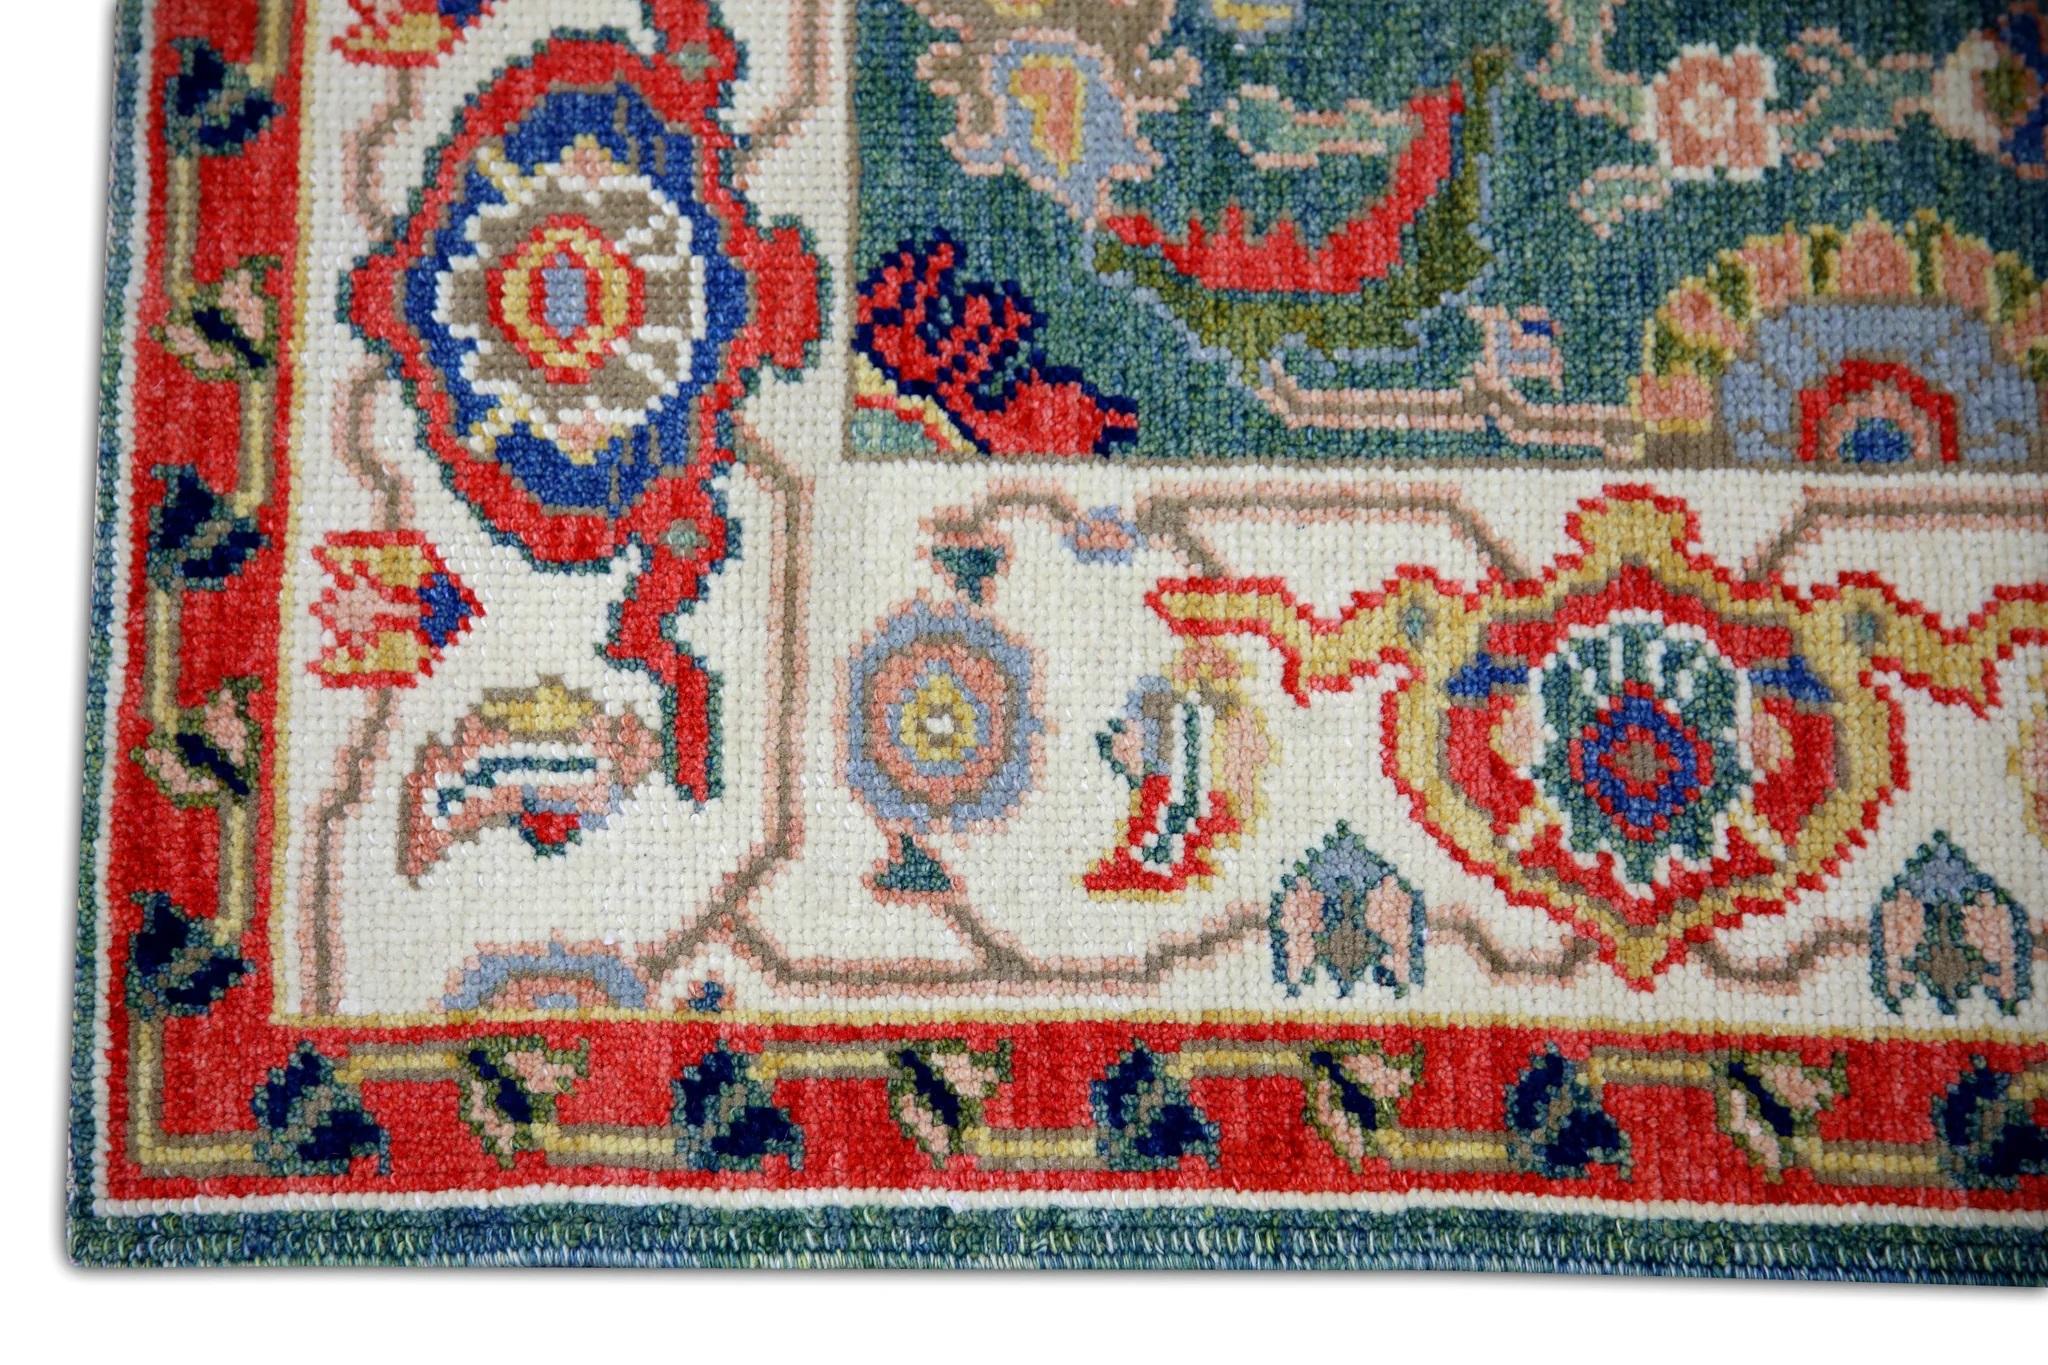 Vegetable Dyed Floral Turkish Finewoven Wool Oushak Rug in Red, Green, and Blue 2'9